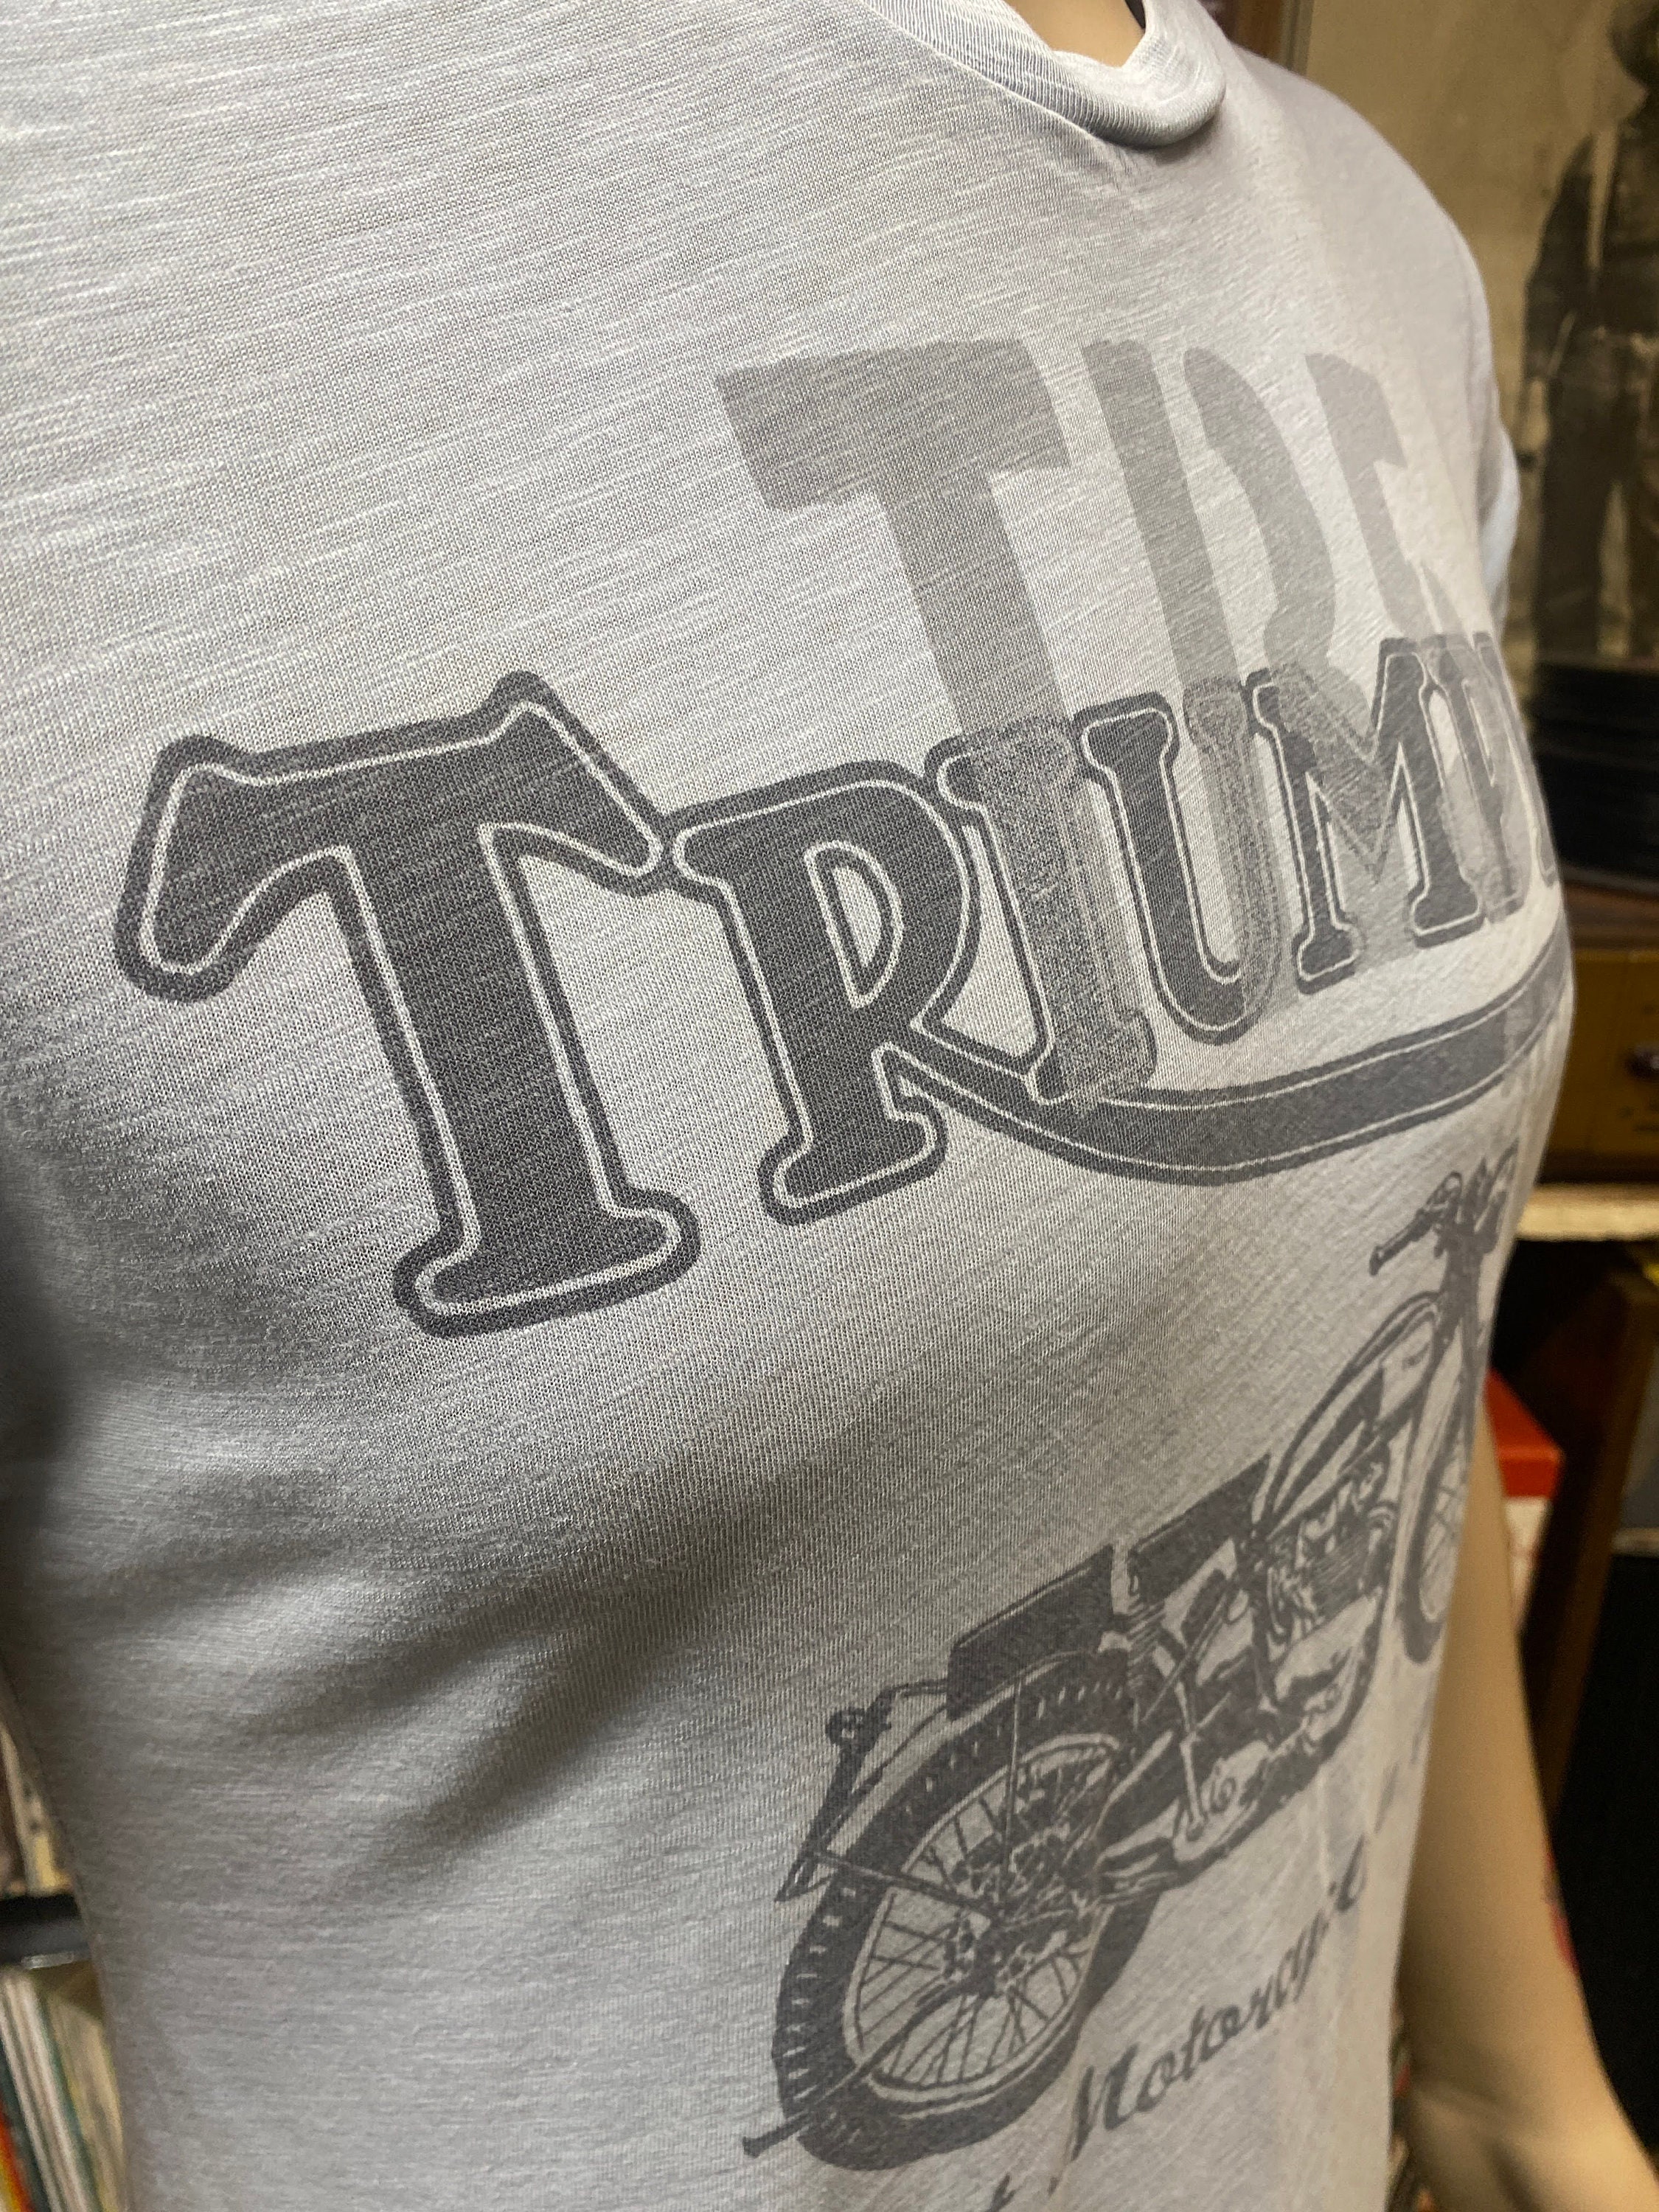 Triumph Motorcycles TR5 500 Soft Cotton Blue T-shirt Size XS Made in U.S.A.  